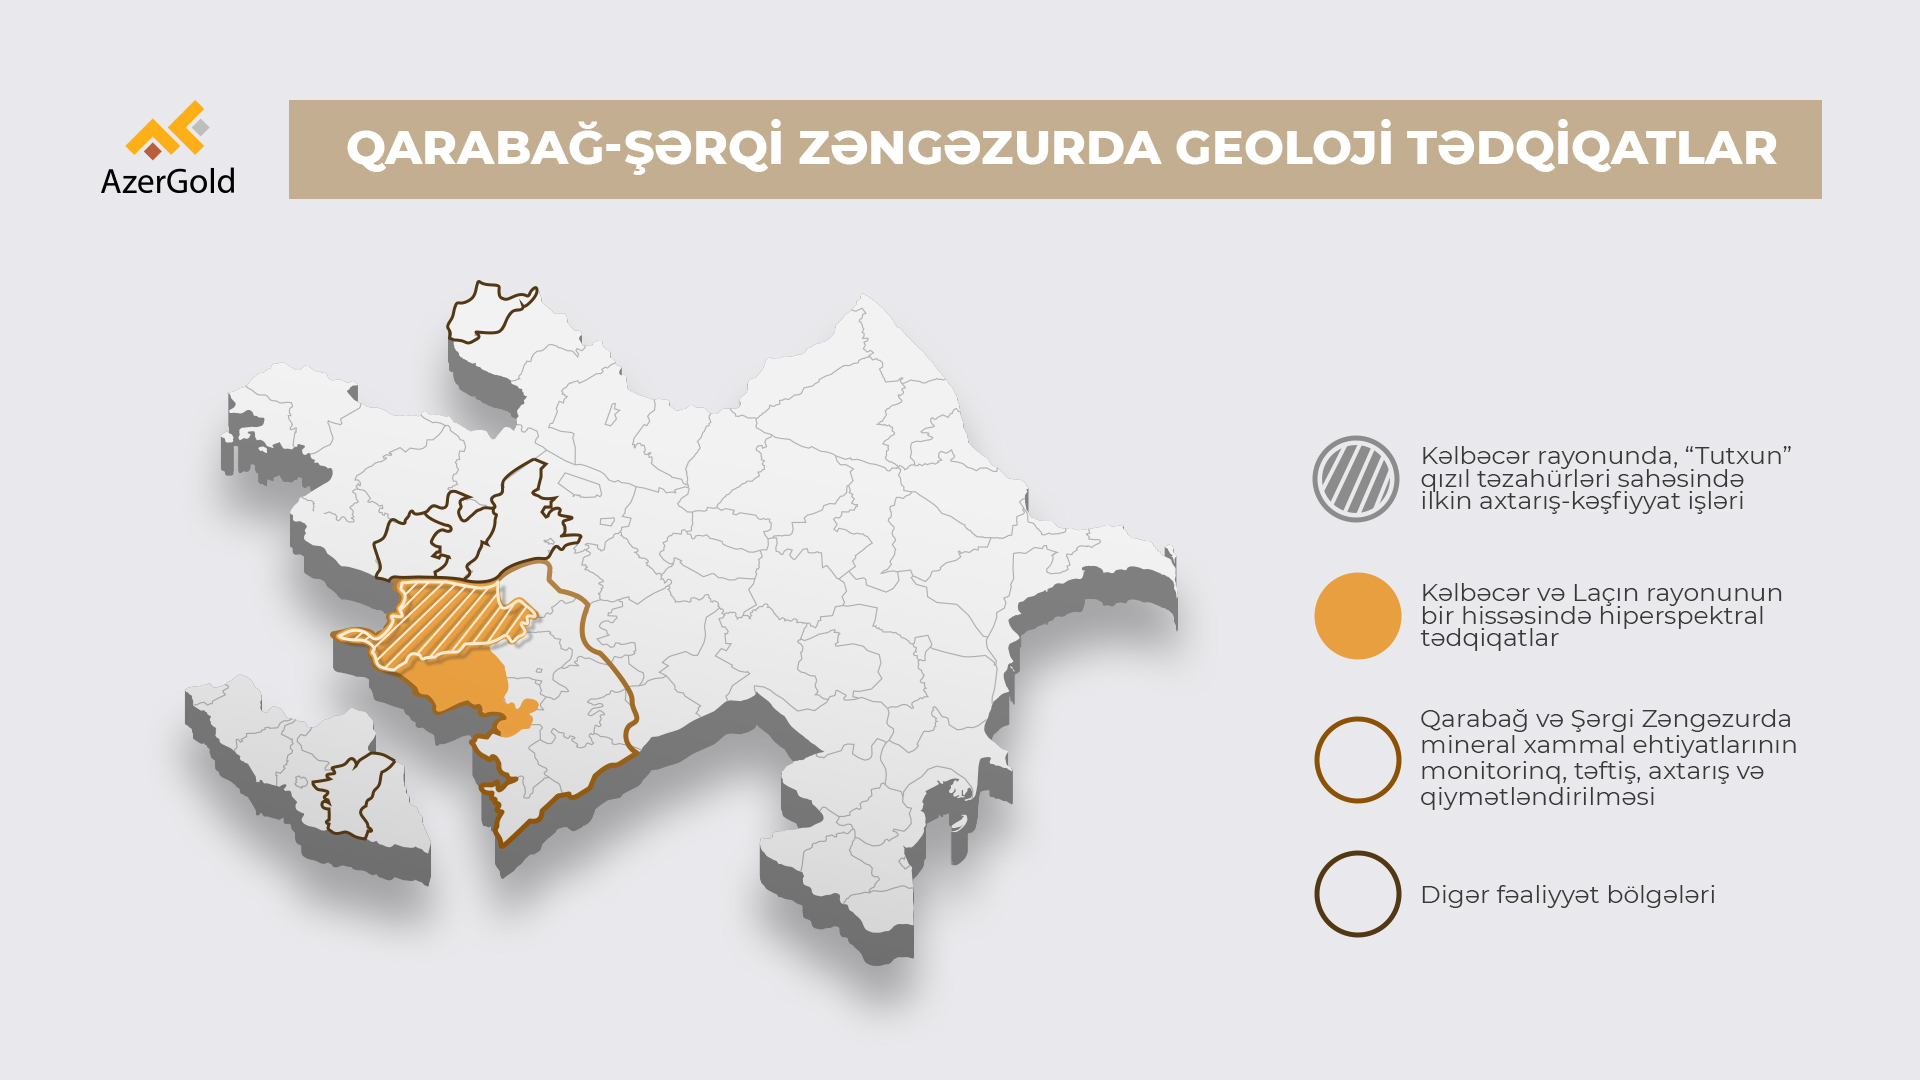 AzerGold CJSC to Expand its Activities in Karabakh and East Zangezur